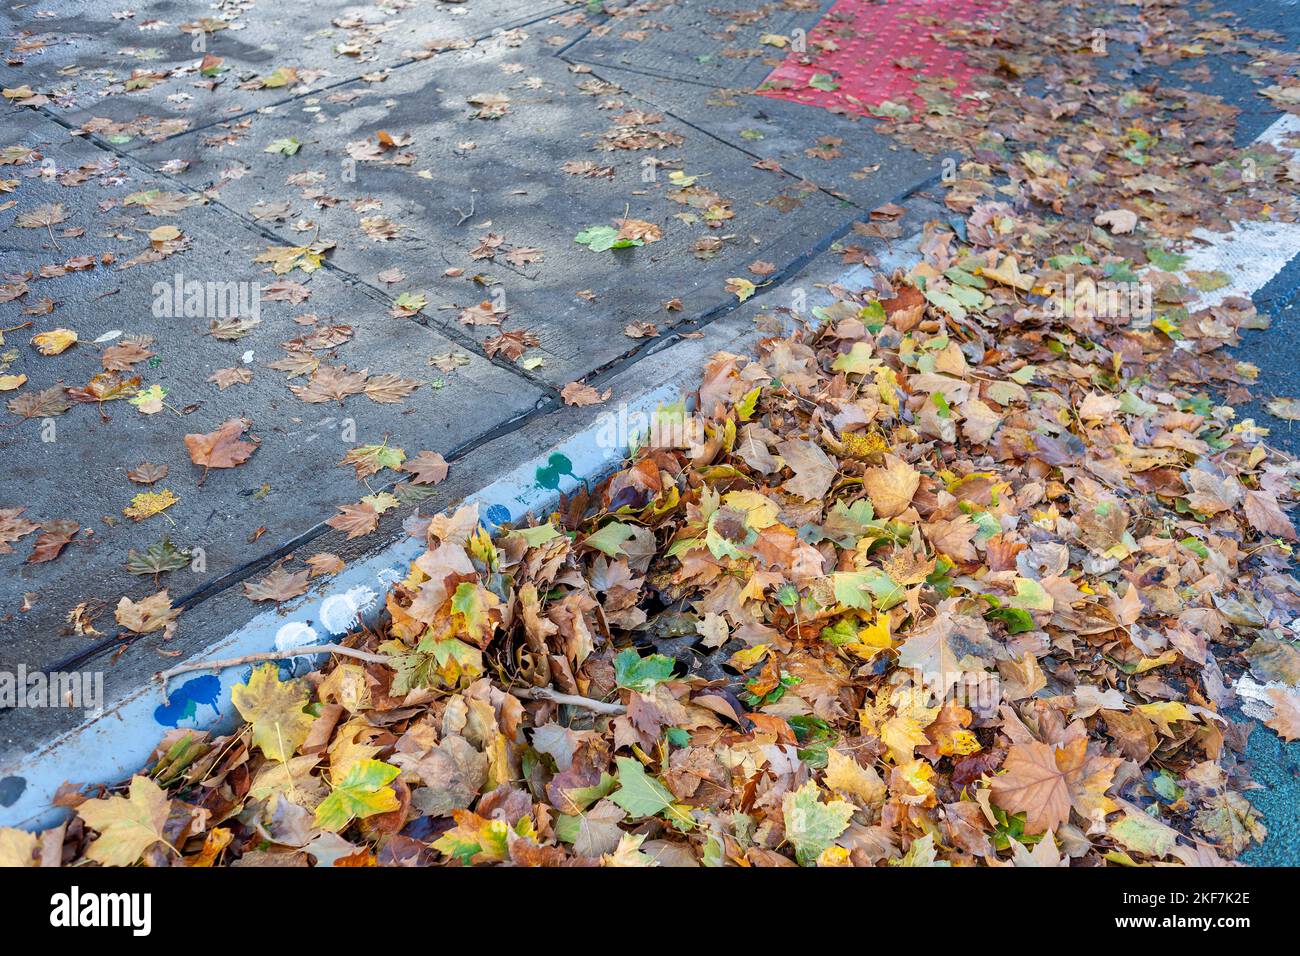 Autumn leaves litter the streets after the remains of Hurricane Nicole passes through New York in Chelsea, on Saturday, November 12, 2022. The city is making an effort to clean catch basins and storm drains to prevent localized flooding. (© Richard B. Levine) Stock Photo